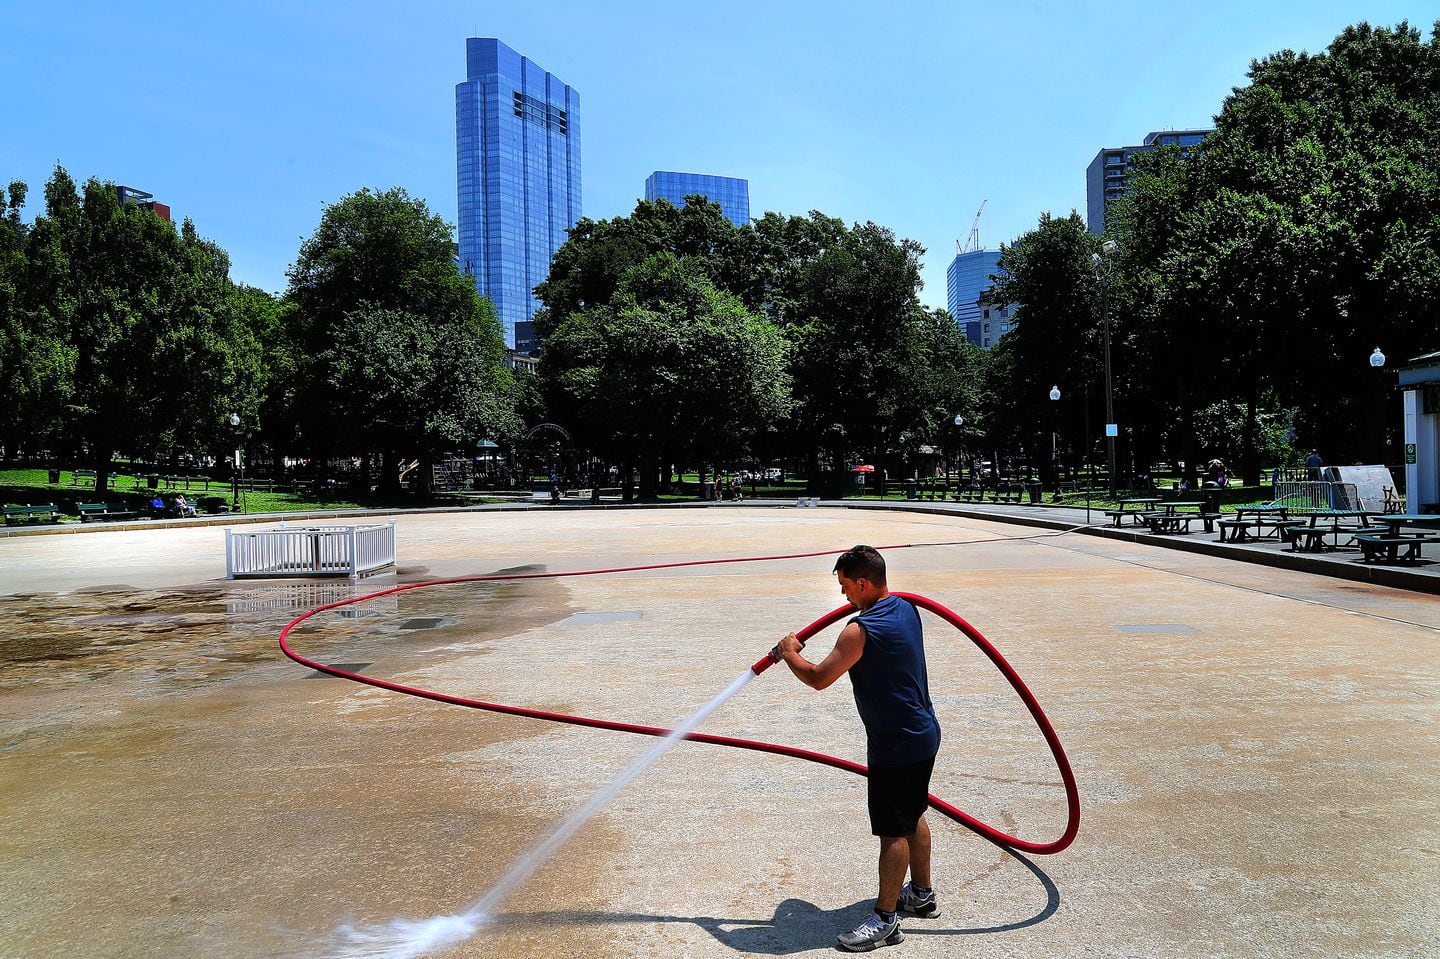 Jean Farias washed down the surface of the Boston Common Frog Pond which will open June 25th.